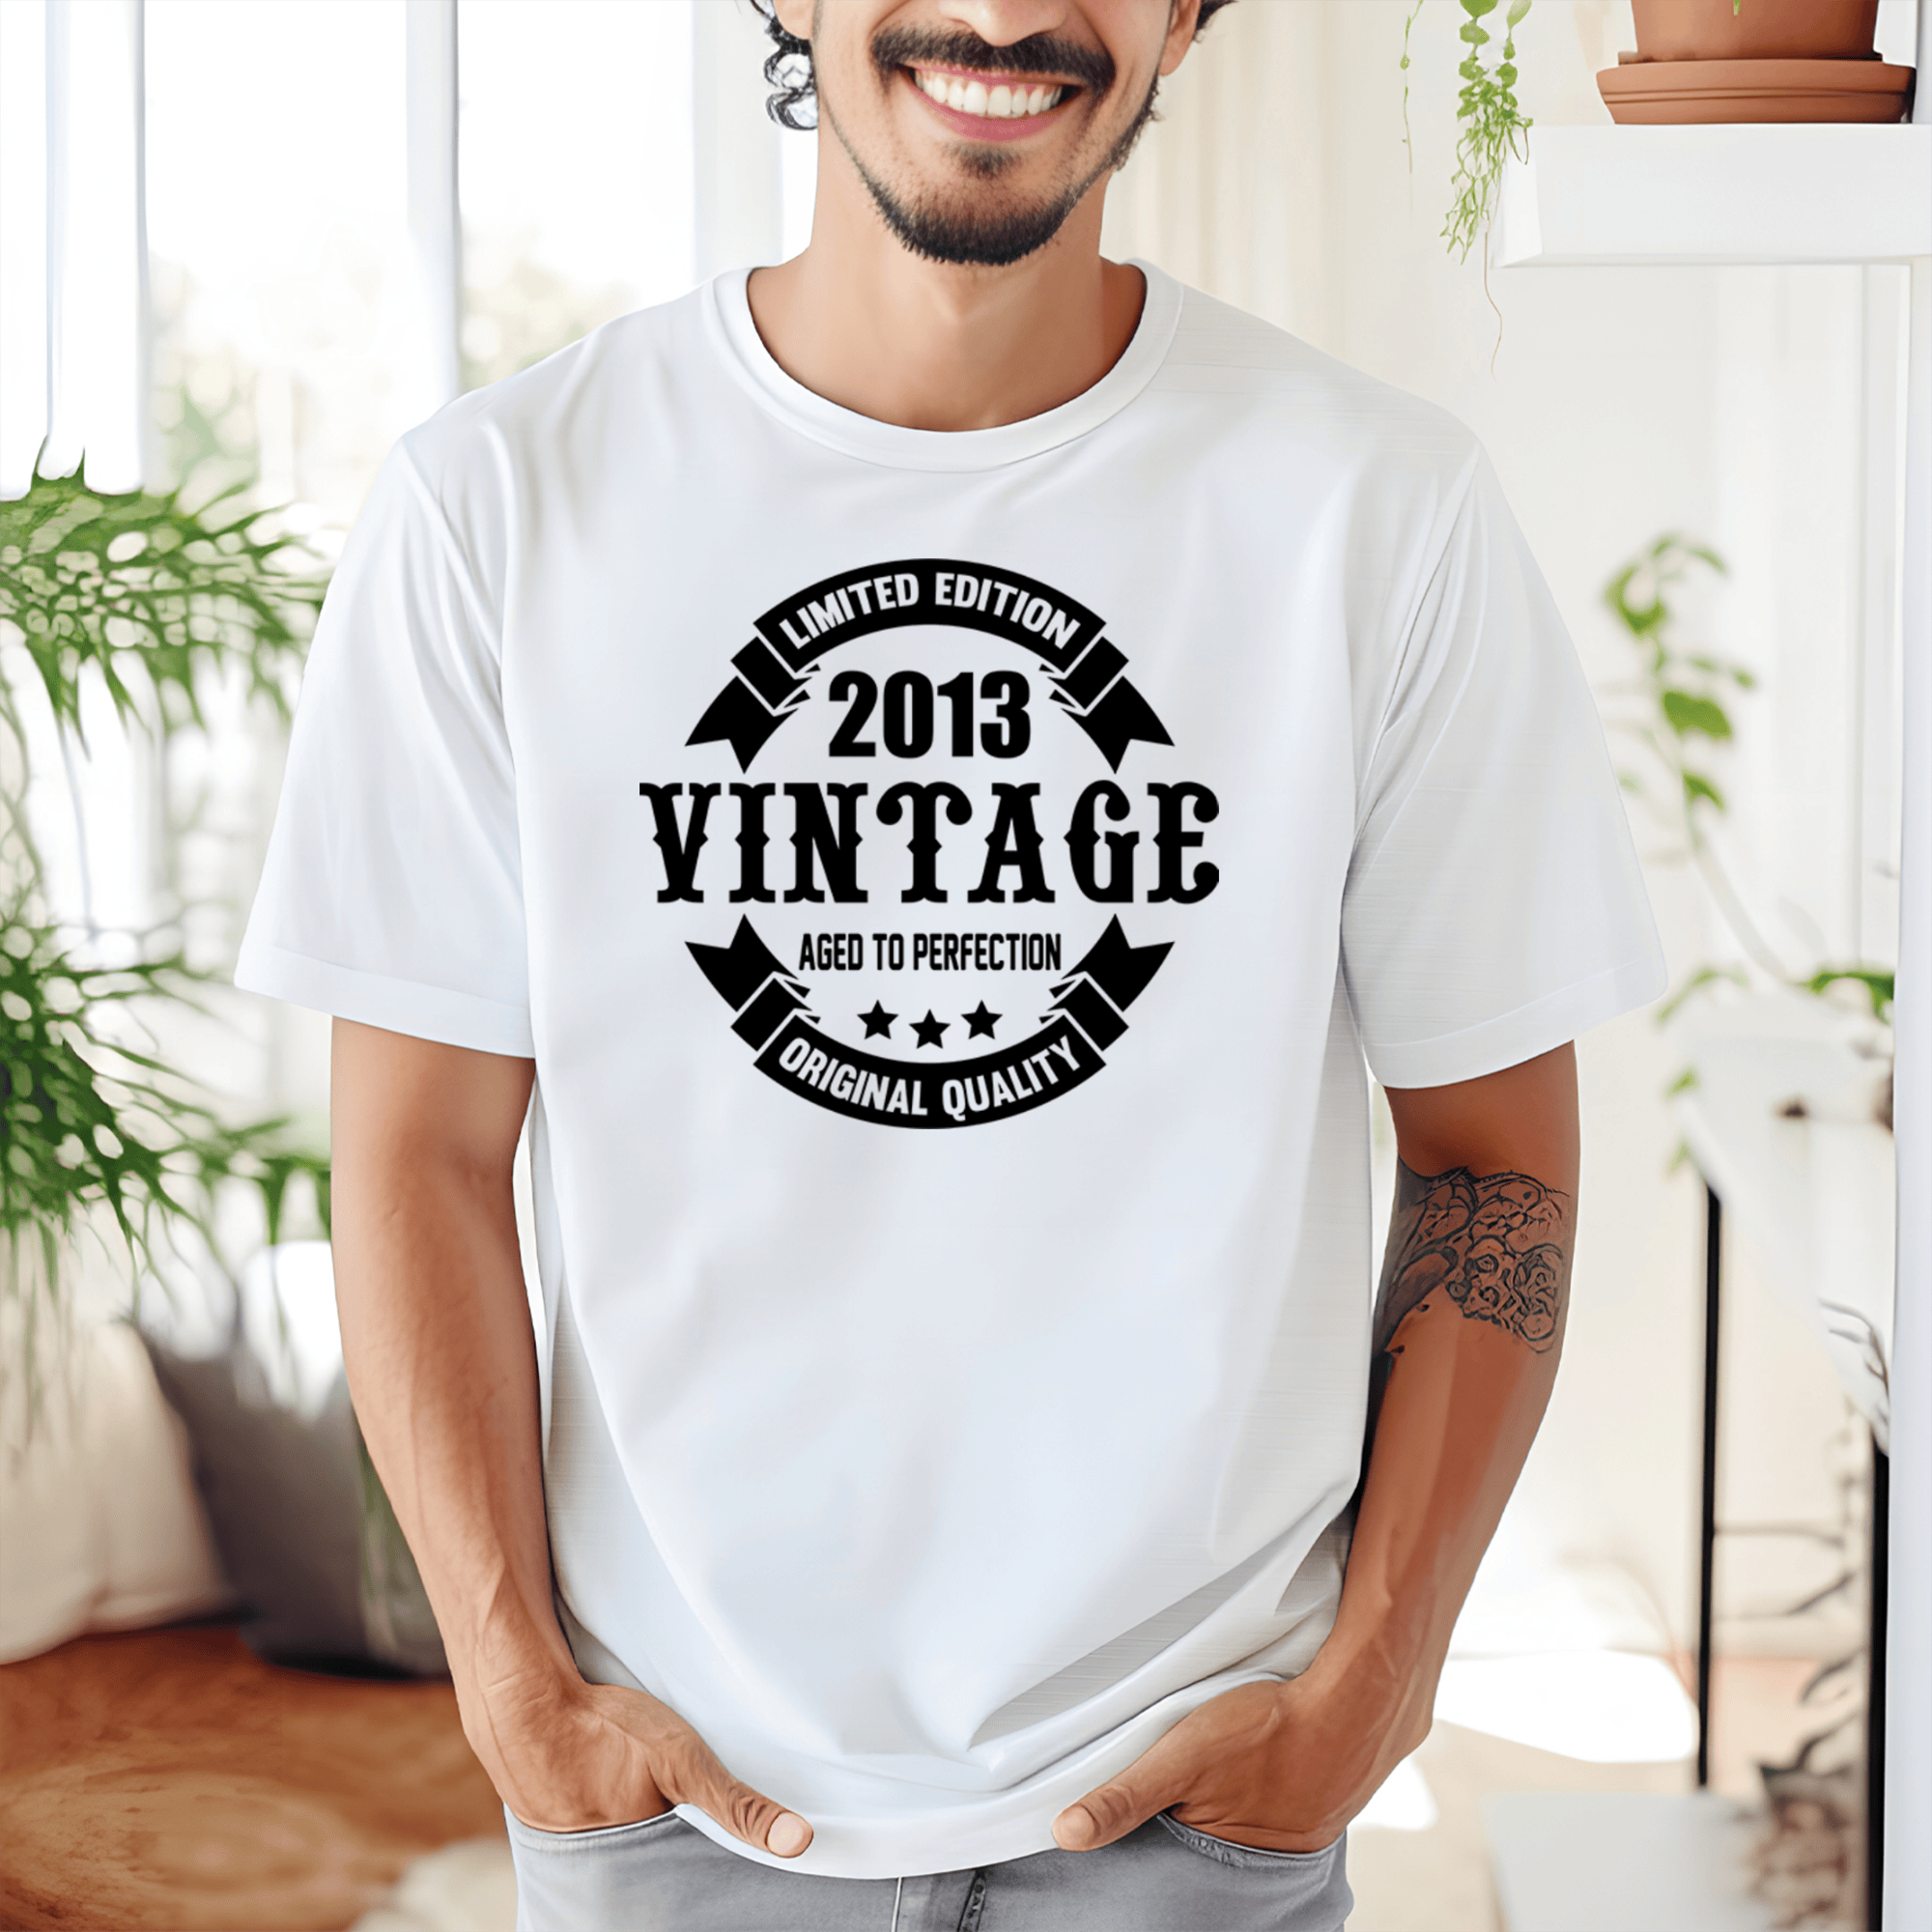 Mens White T Shirt with 2013-Vintage design